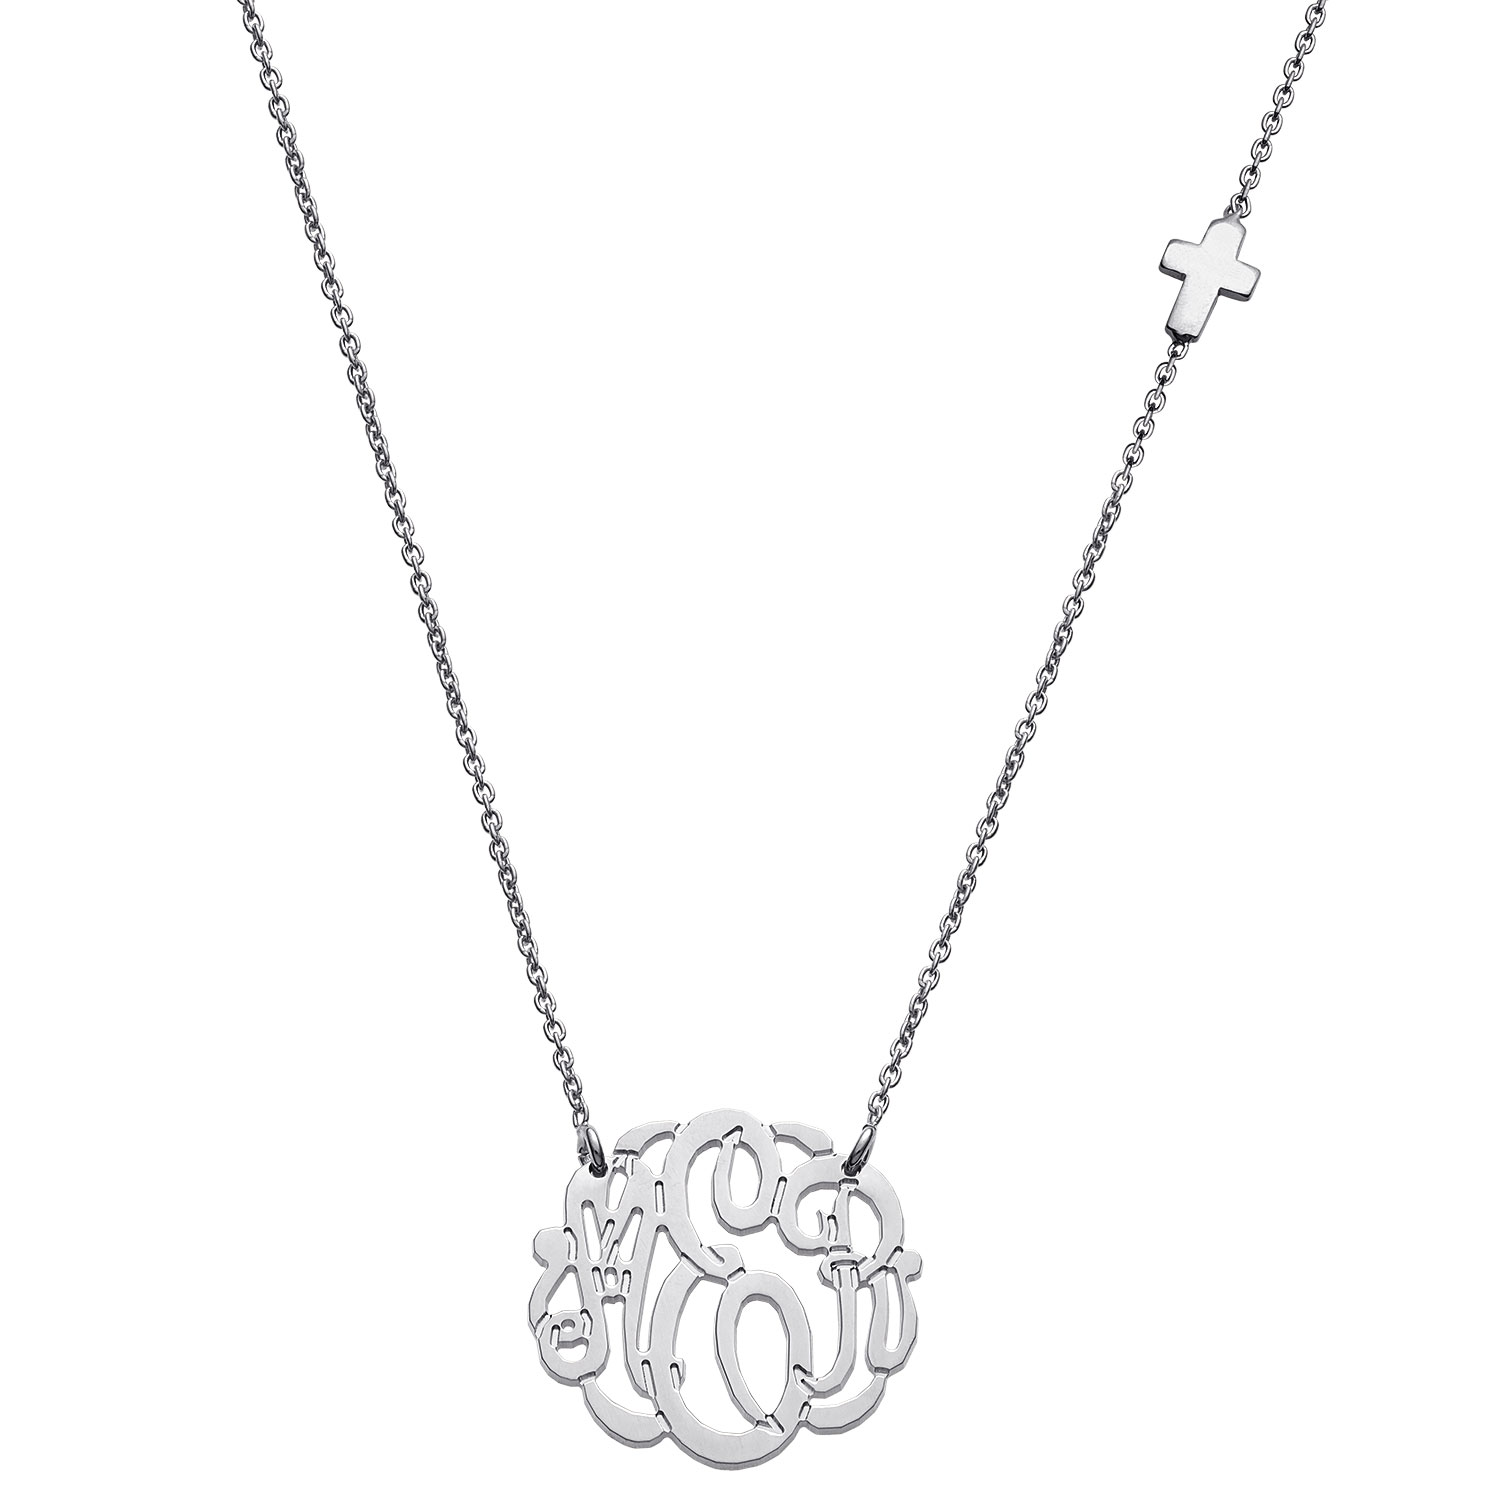 Sterling Silver 3 Initial Monogram Necklace with Cross Charm - Petite